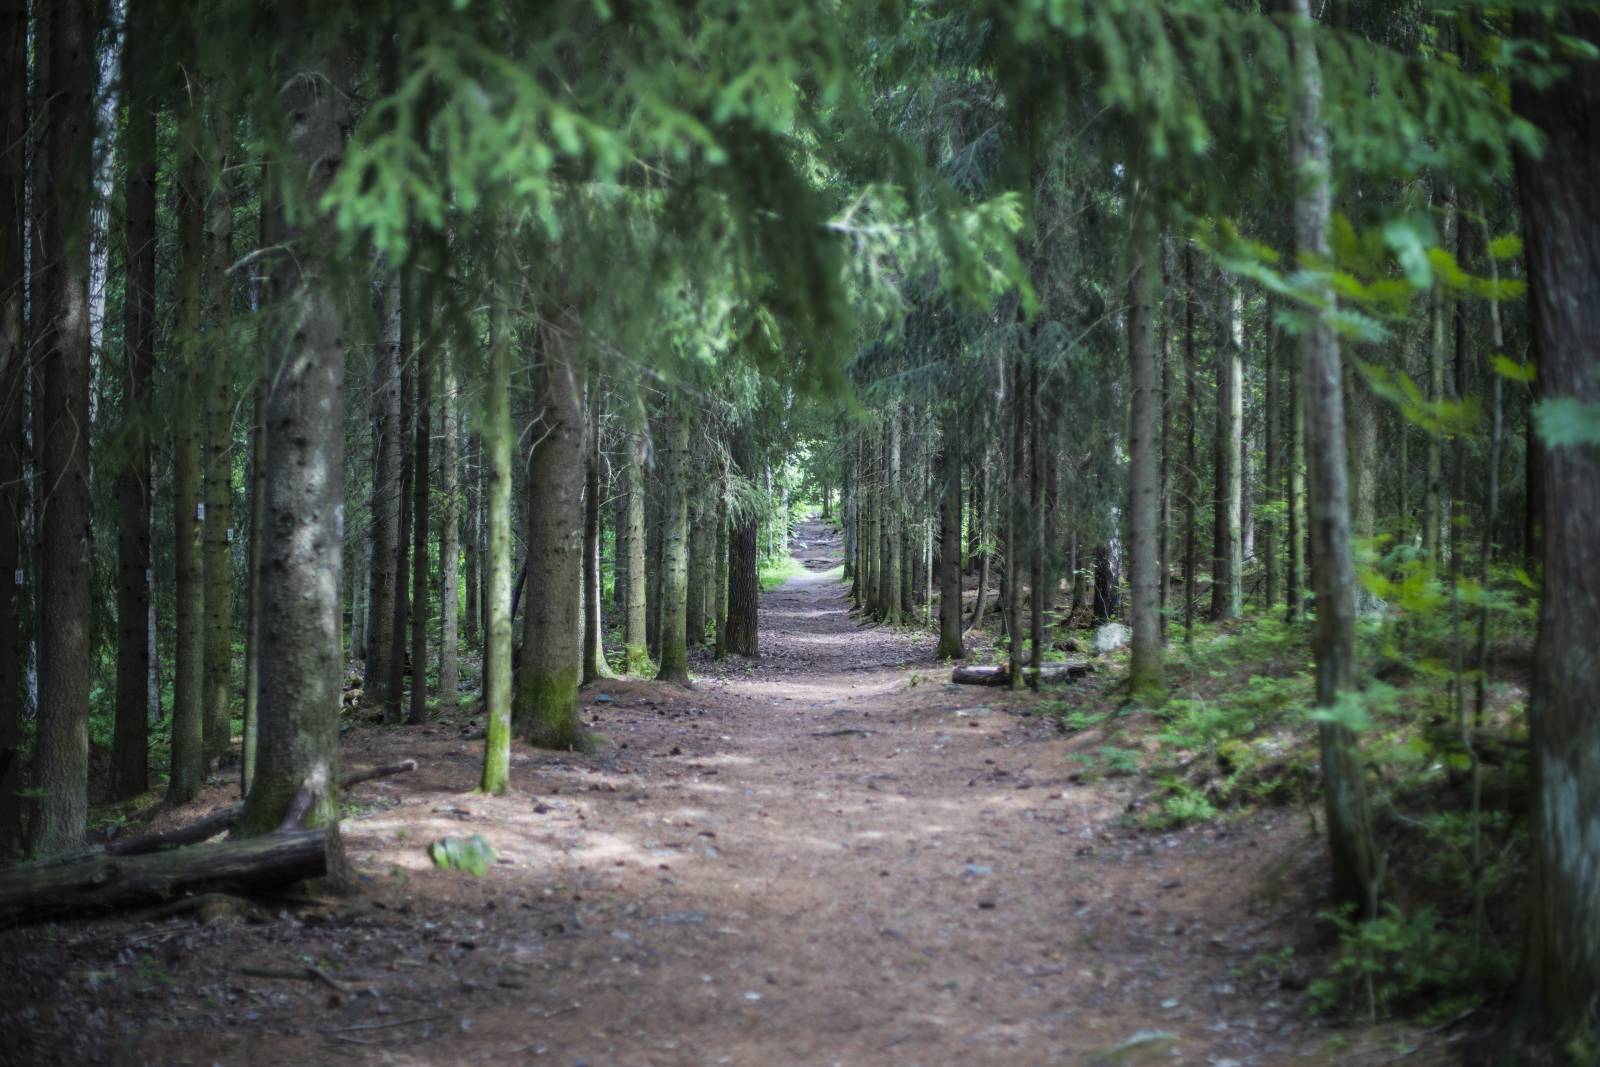 Wooded path passing through a lush forest of evergreen trees.